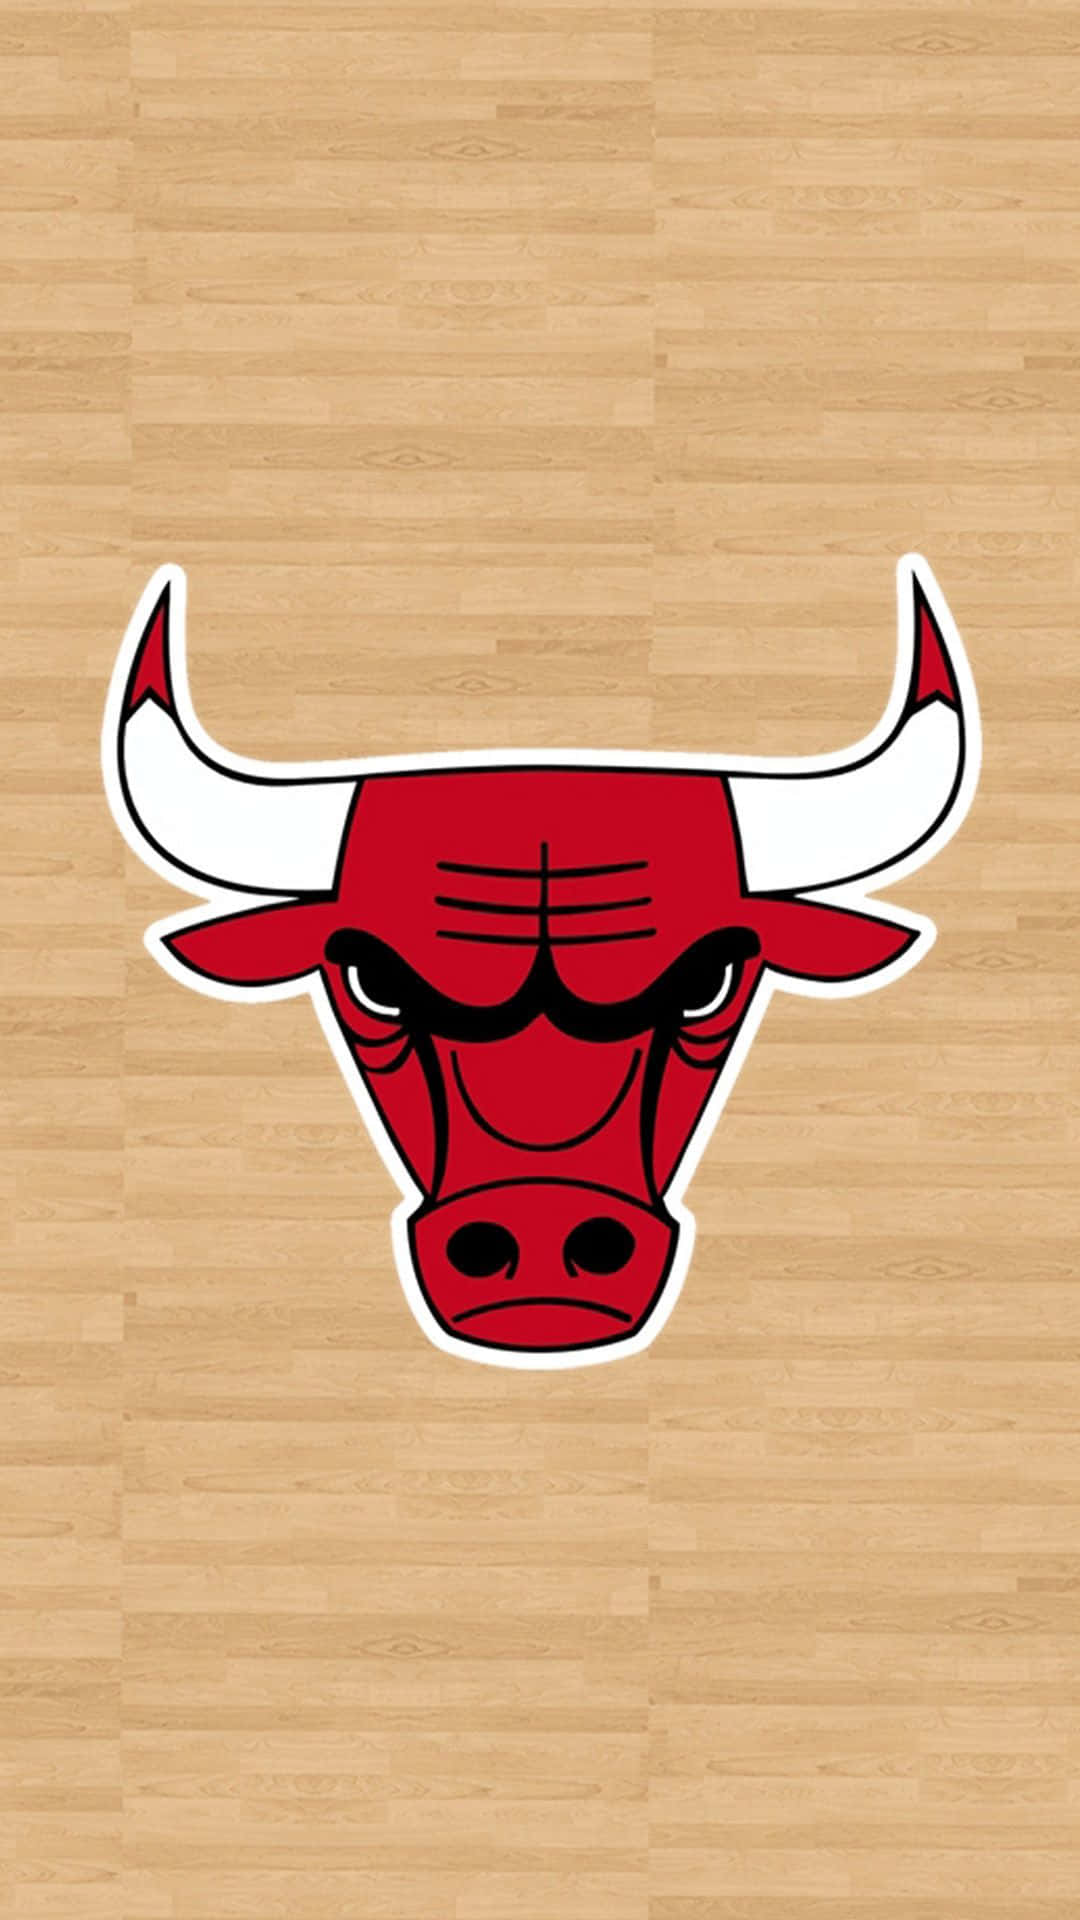 90+ Chicago Bulls HD Wallpapers and Backgrounds